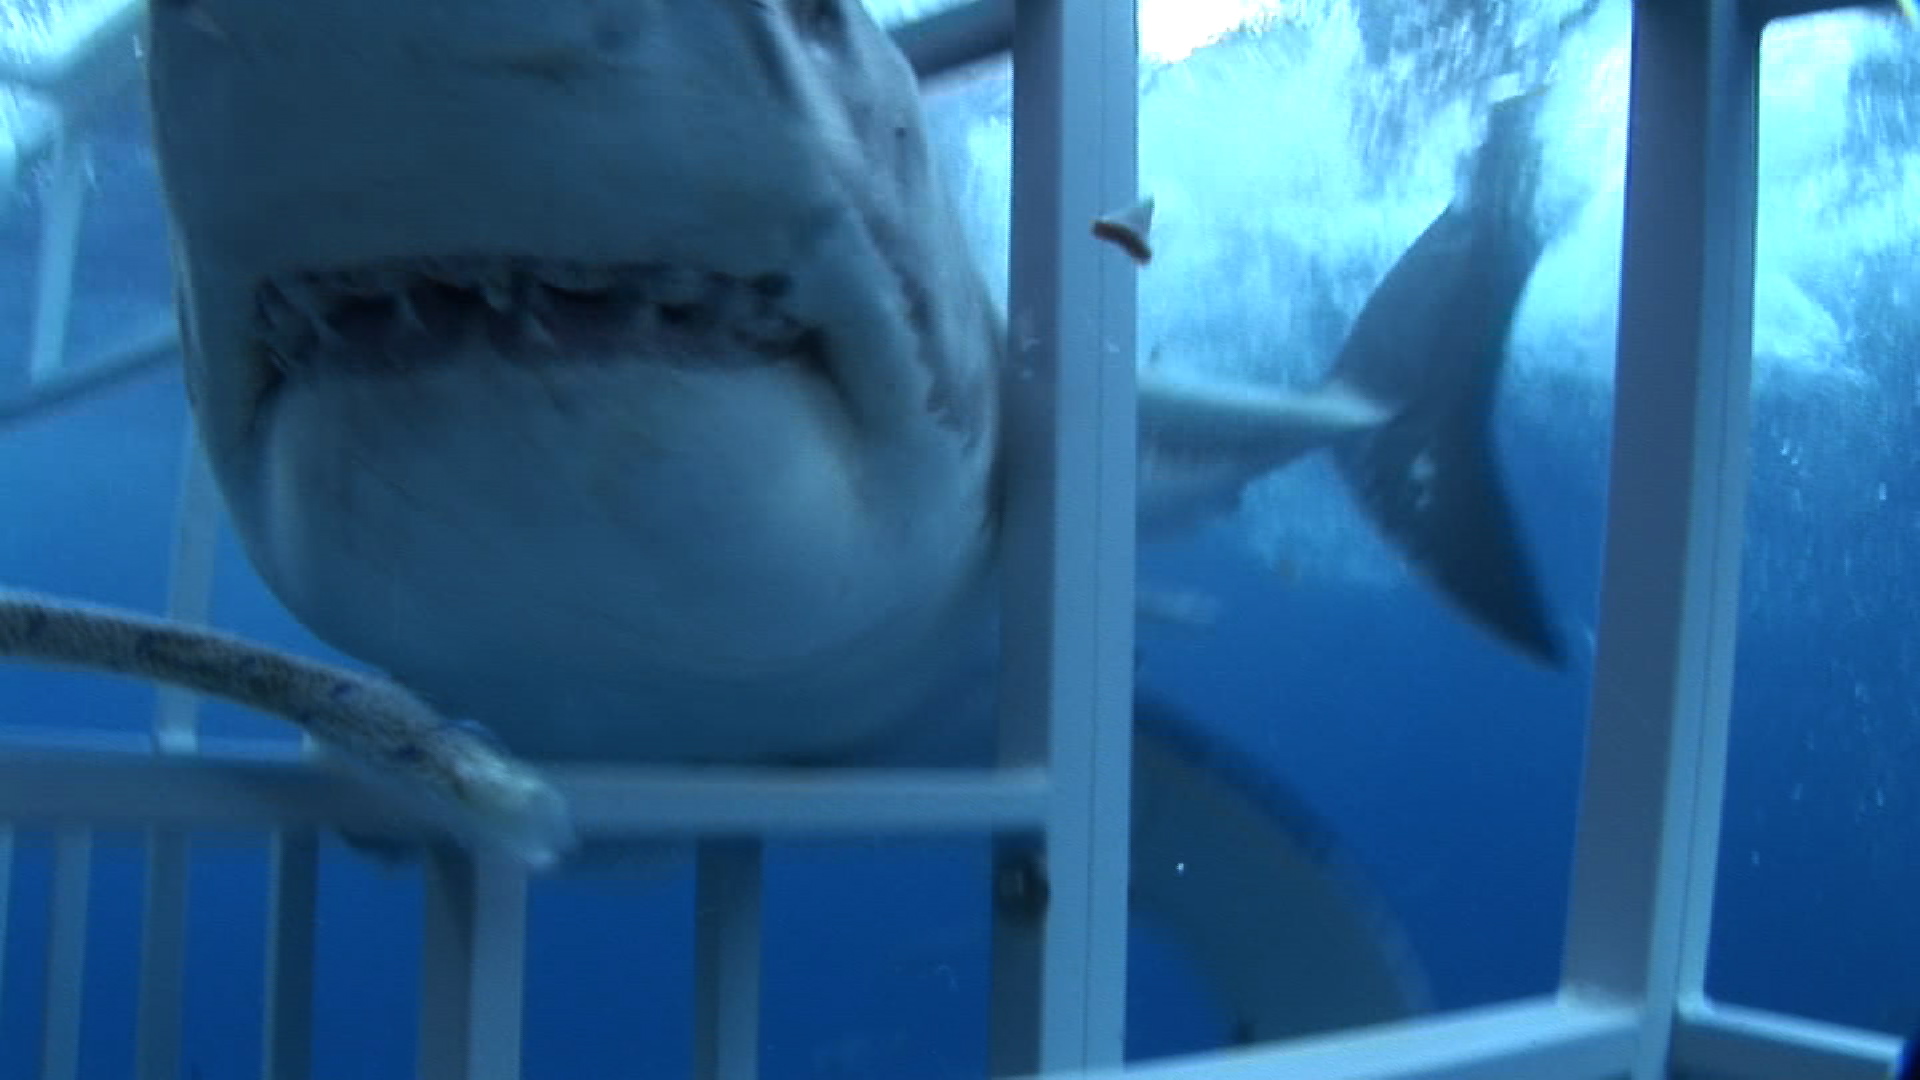 great white shark from amazing video